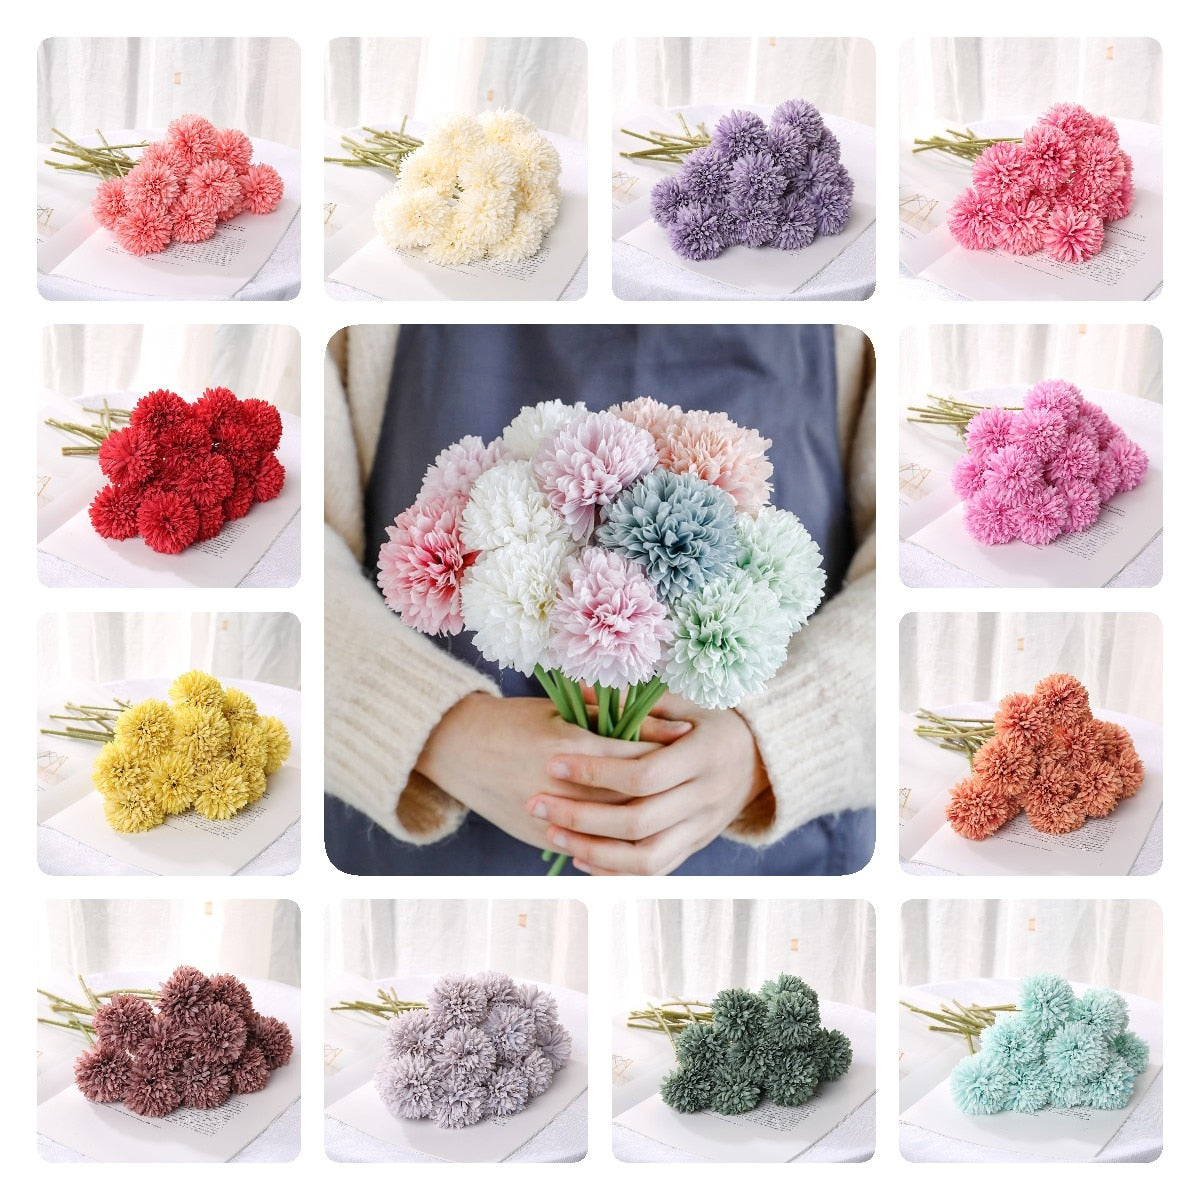 Qfdian valentines day gifts 1/3/5PcsBunch Artificial Flower Bouquet Silk Dandelion Flower Ball Fake Flowers DIY Home Widding Decoration Valentines Day Gifts